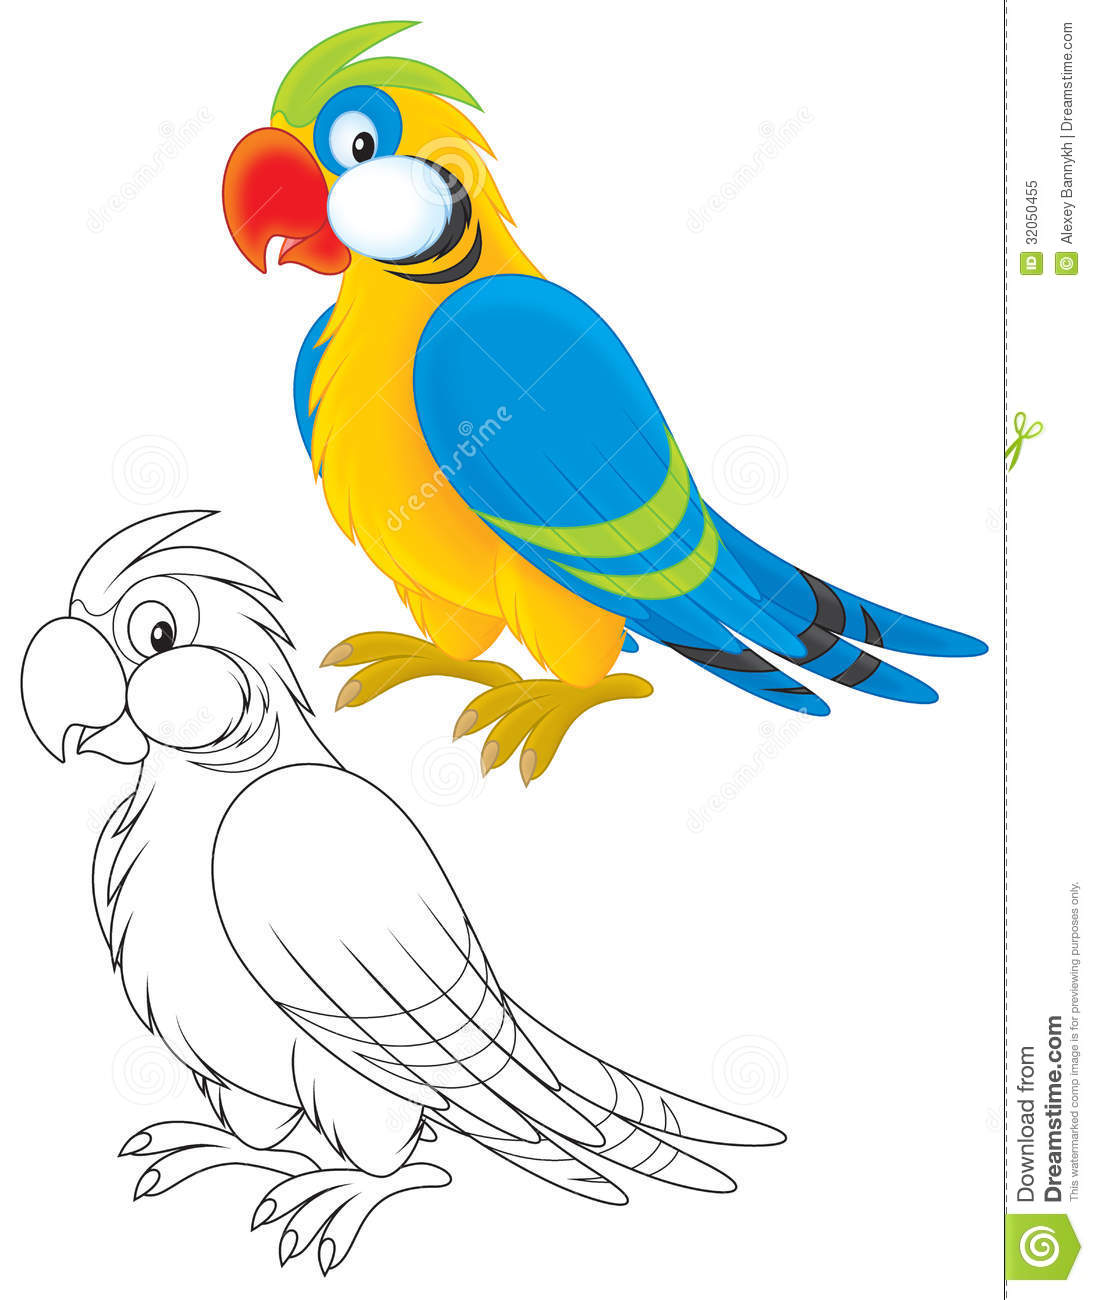 Parrot Color And Black And White Outline Illustrations On A White